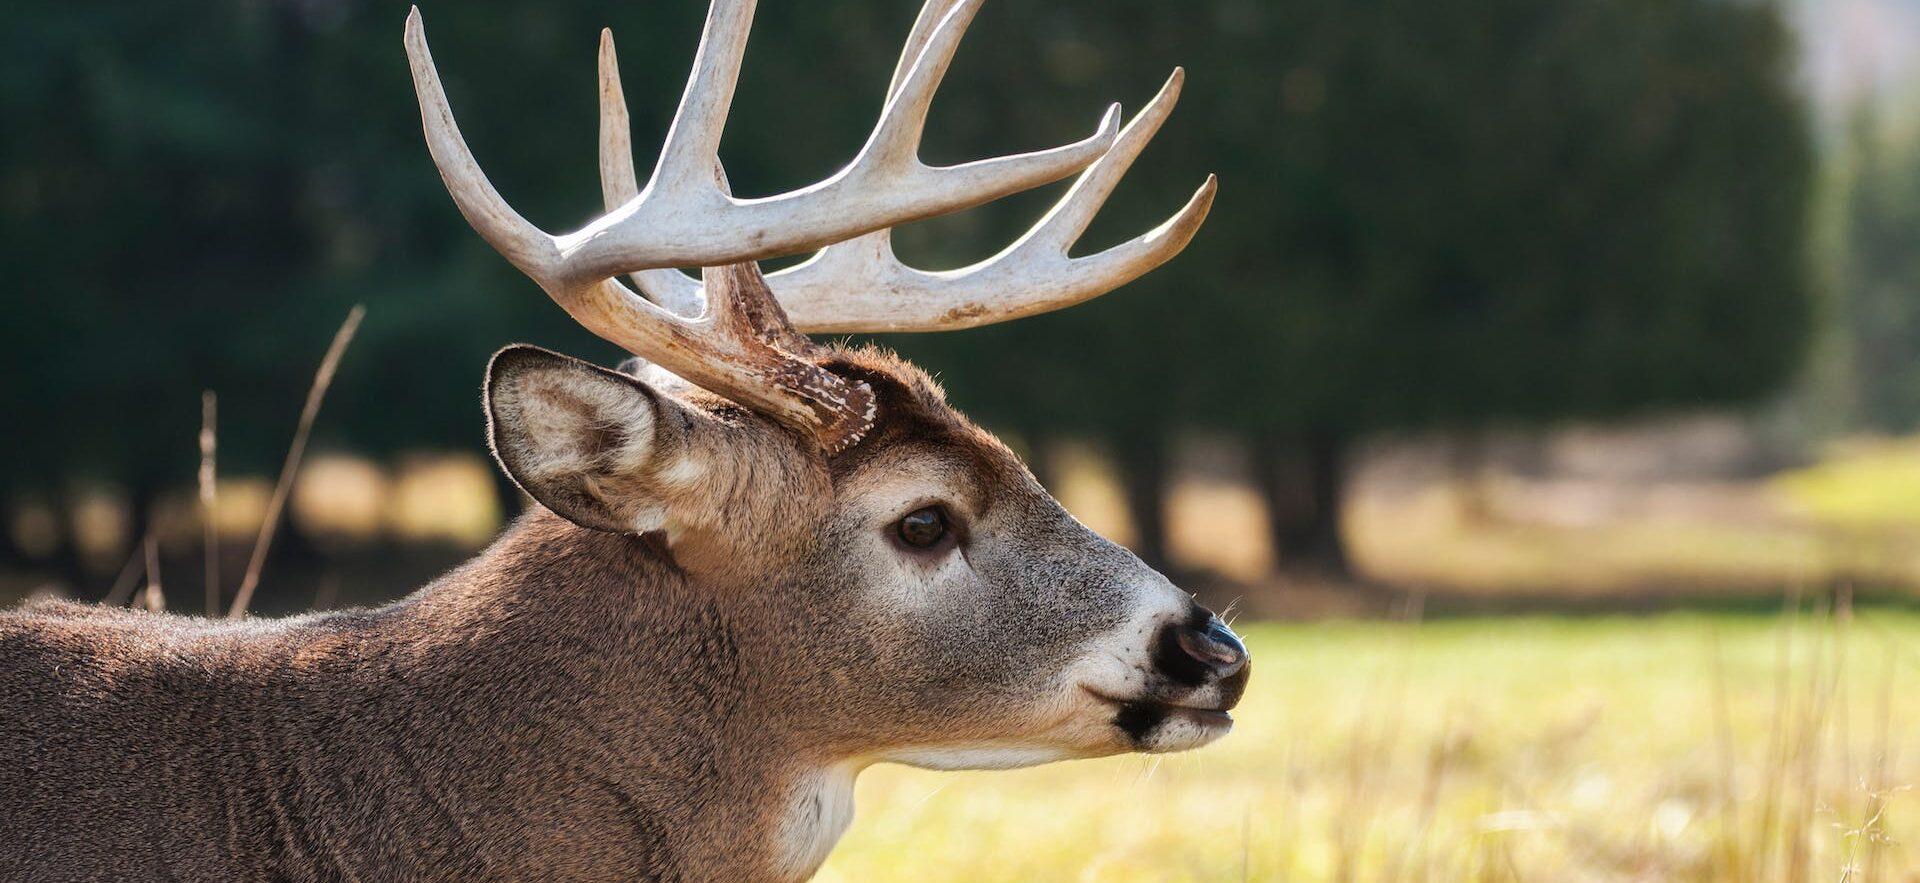 Yellowstone National Park Witness First Rare ‘Zombie Disease’ In Mule Deer